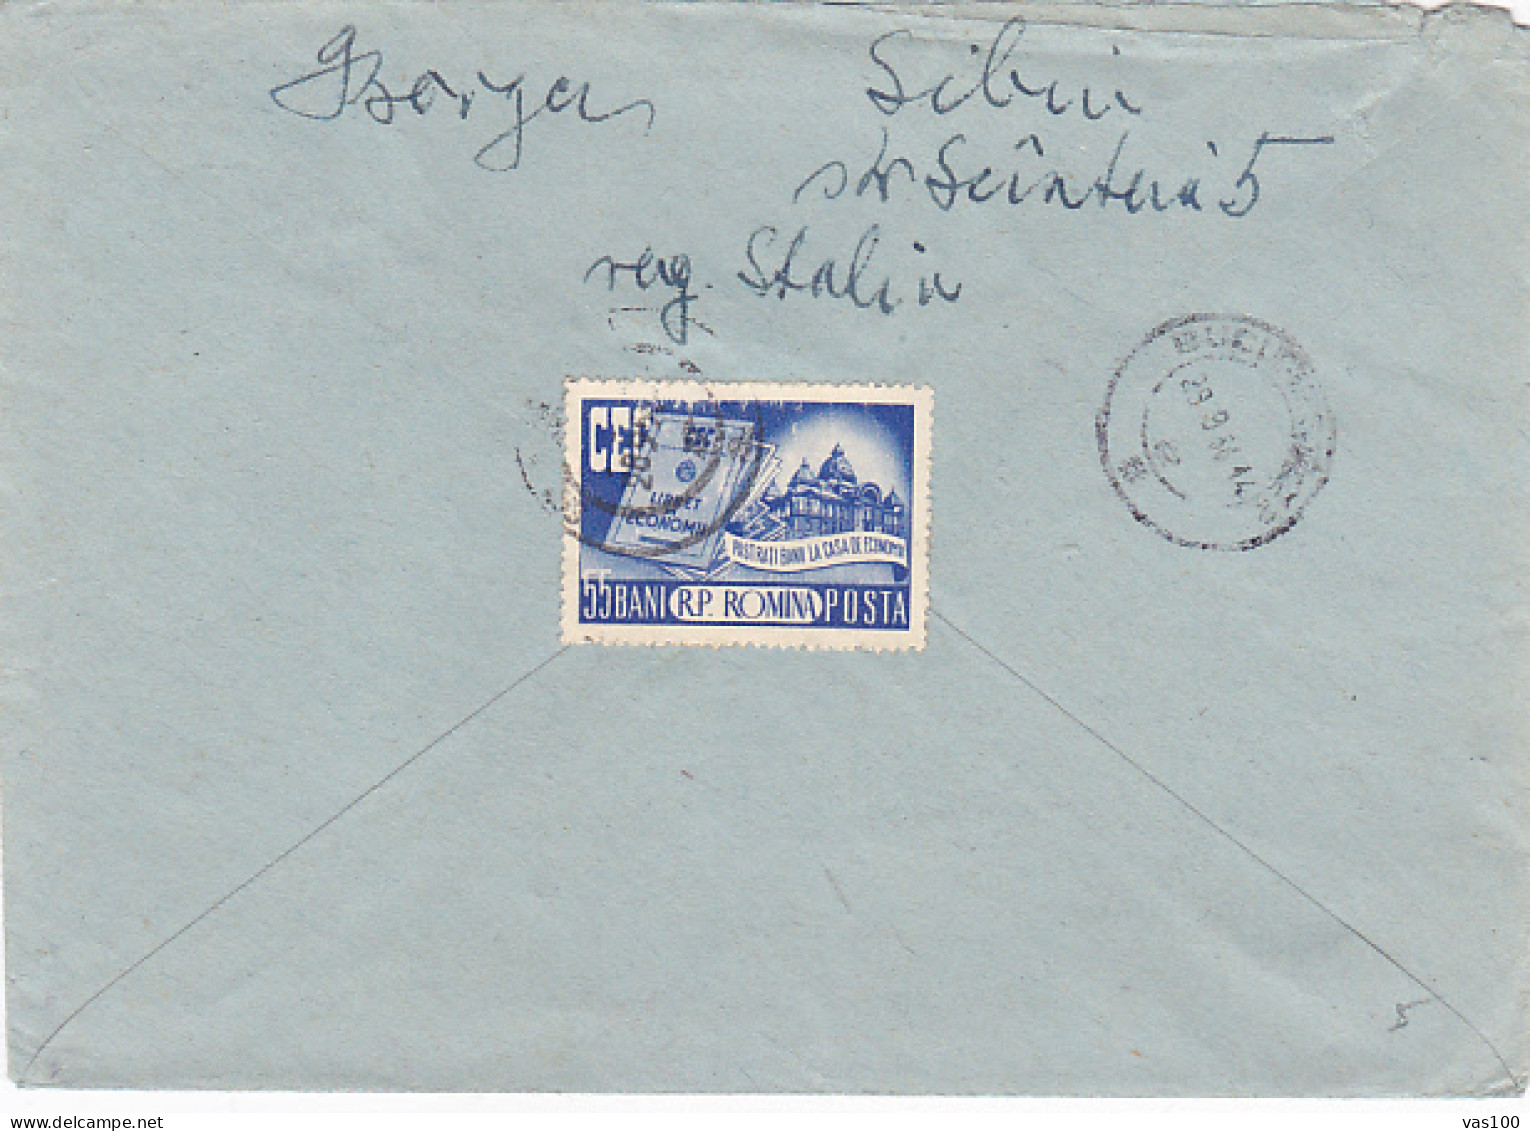 SAVINGS BANK ADVERTISING, STAMPS ON COVER, 1954, ROMANIA - Storia Postale